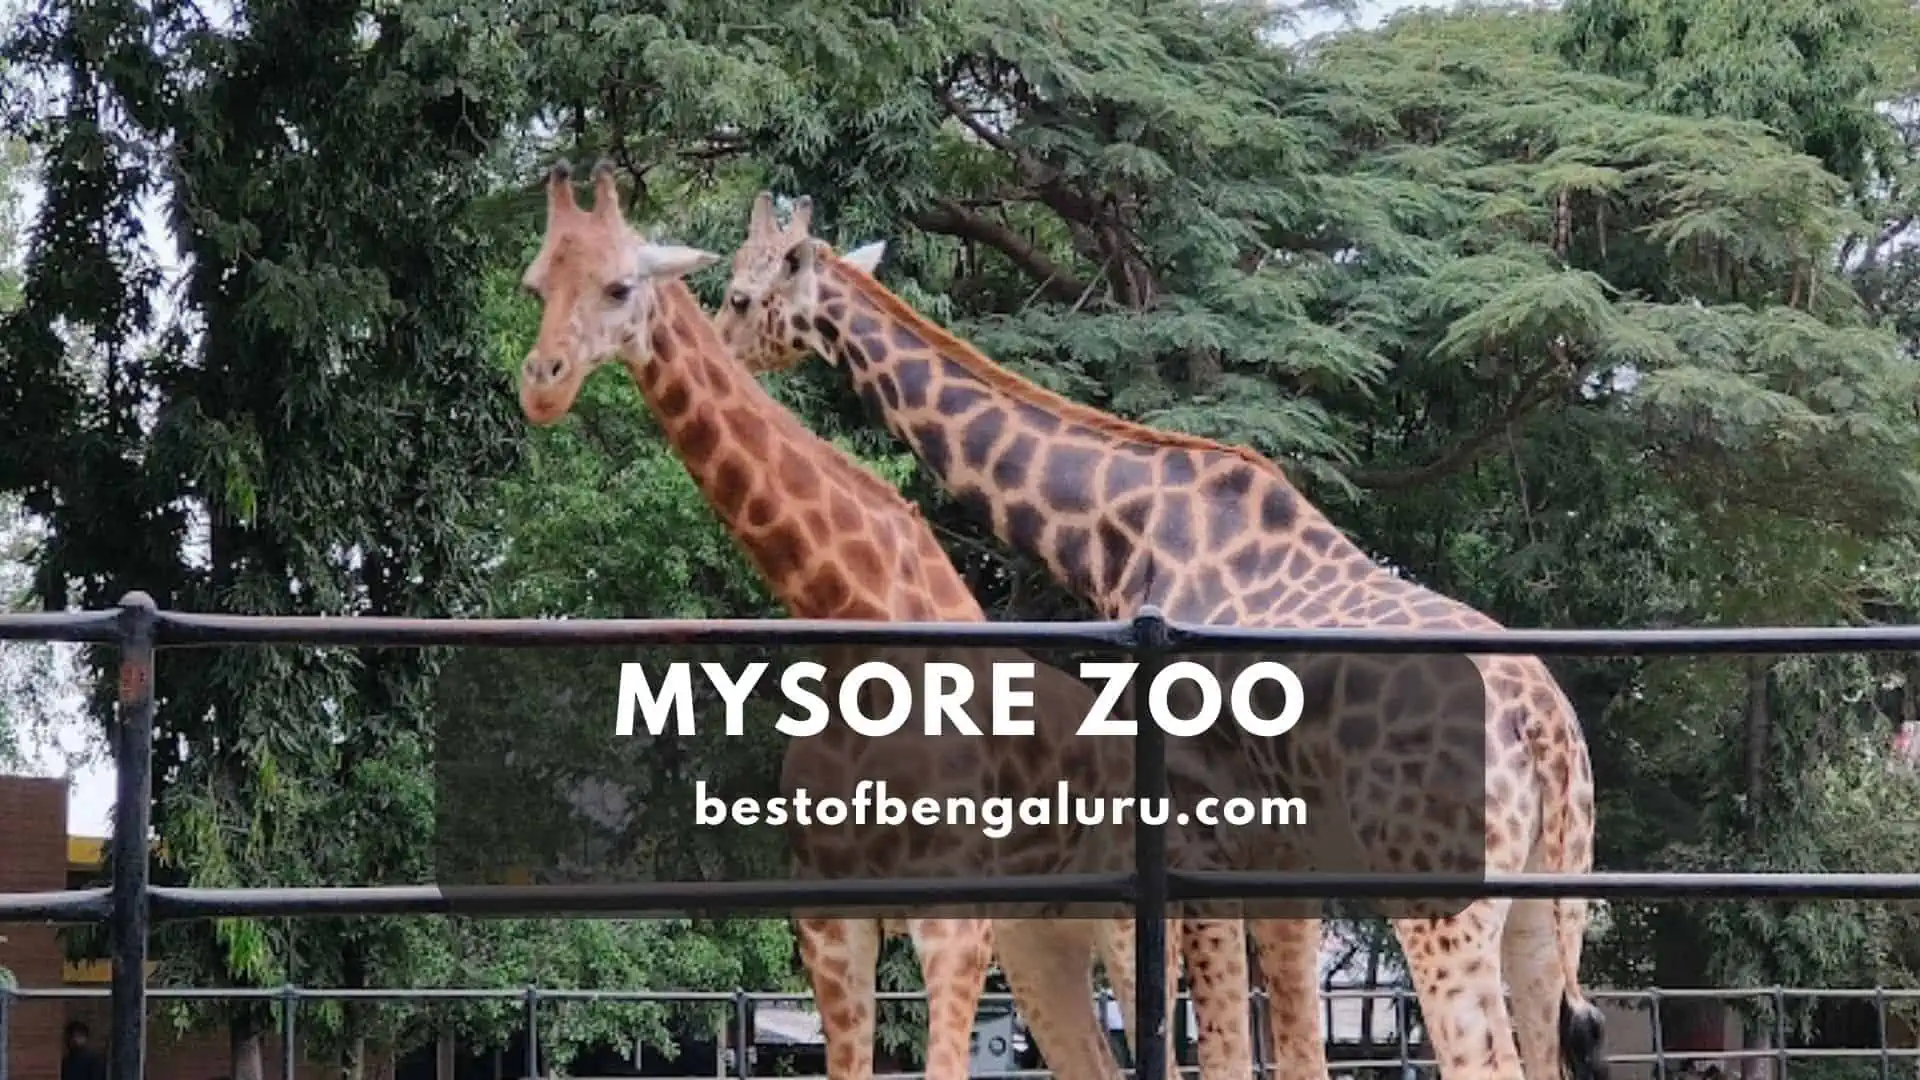 Mysore Zoo Timings, Entry Fee, Ticket Price, Photos, Animal Details in